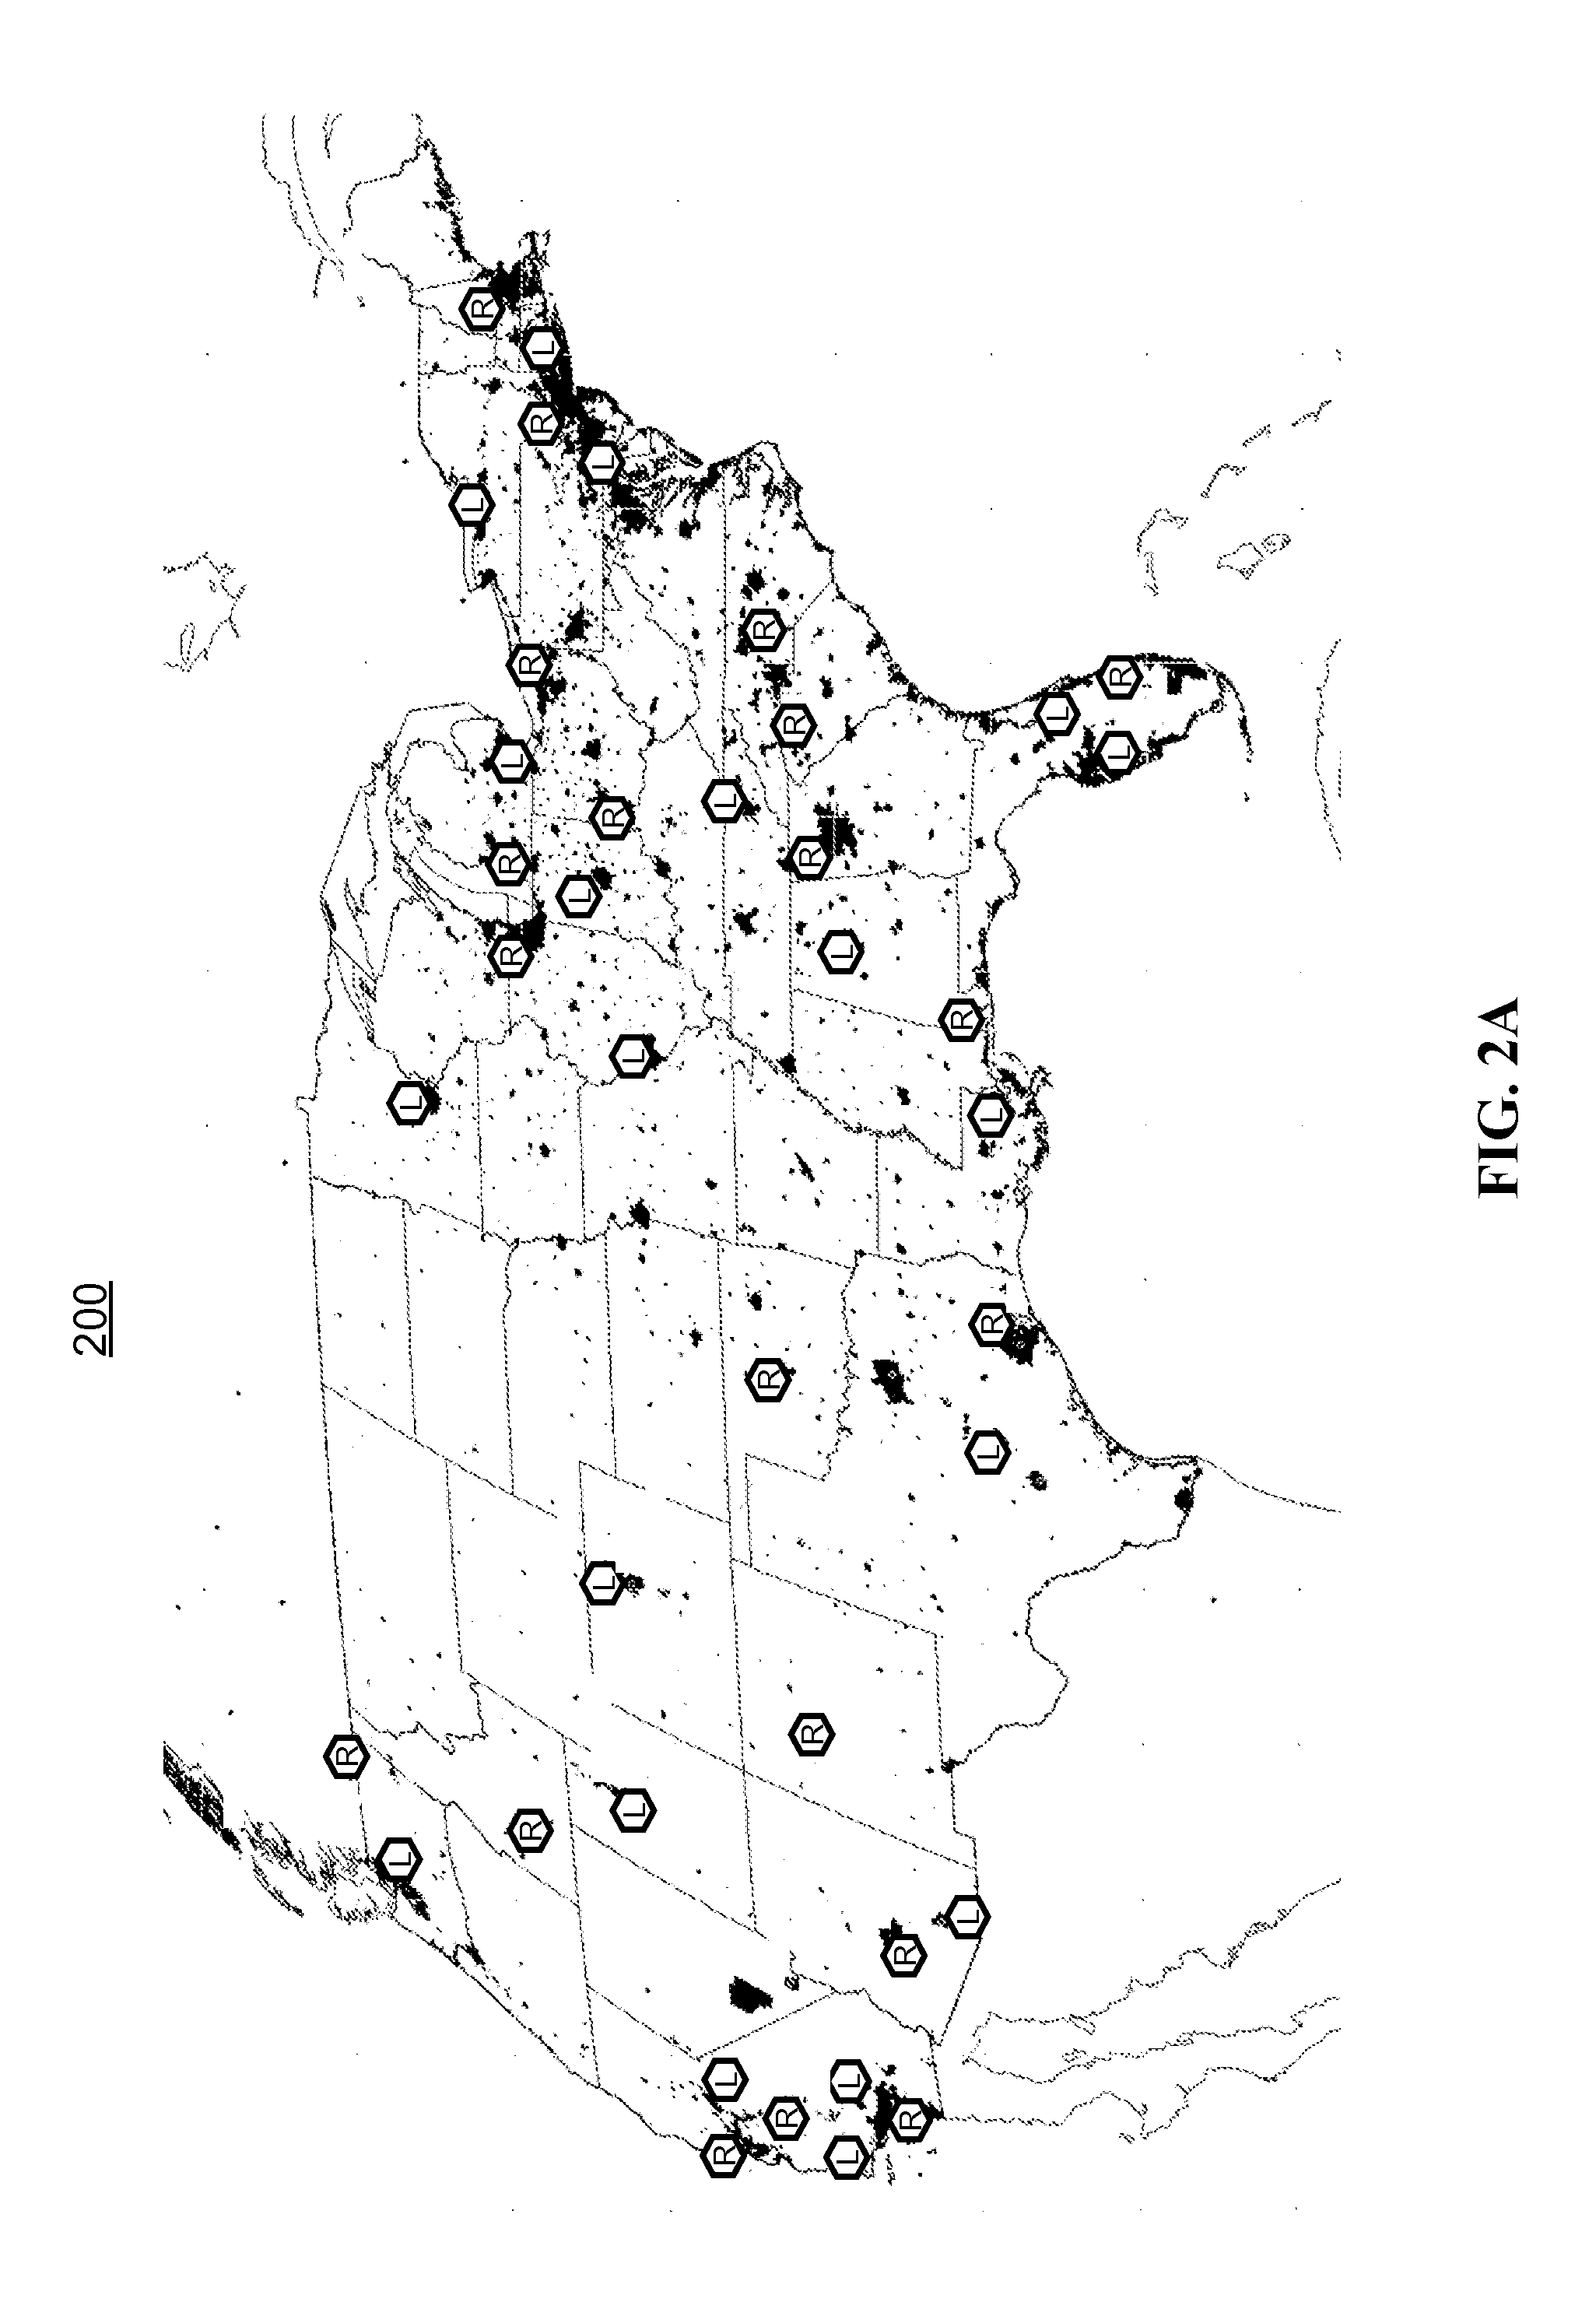 Flexible capacity satellite communications system with dynamic distribution and coverage areas